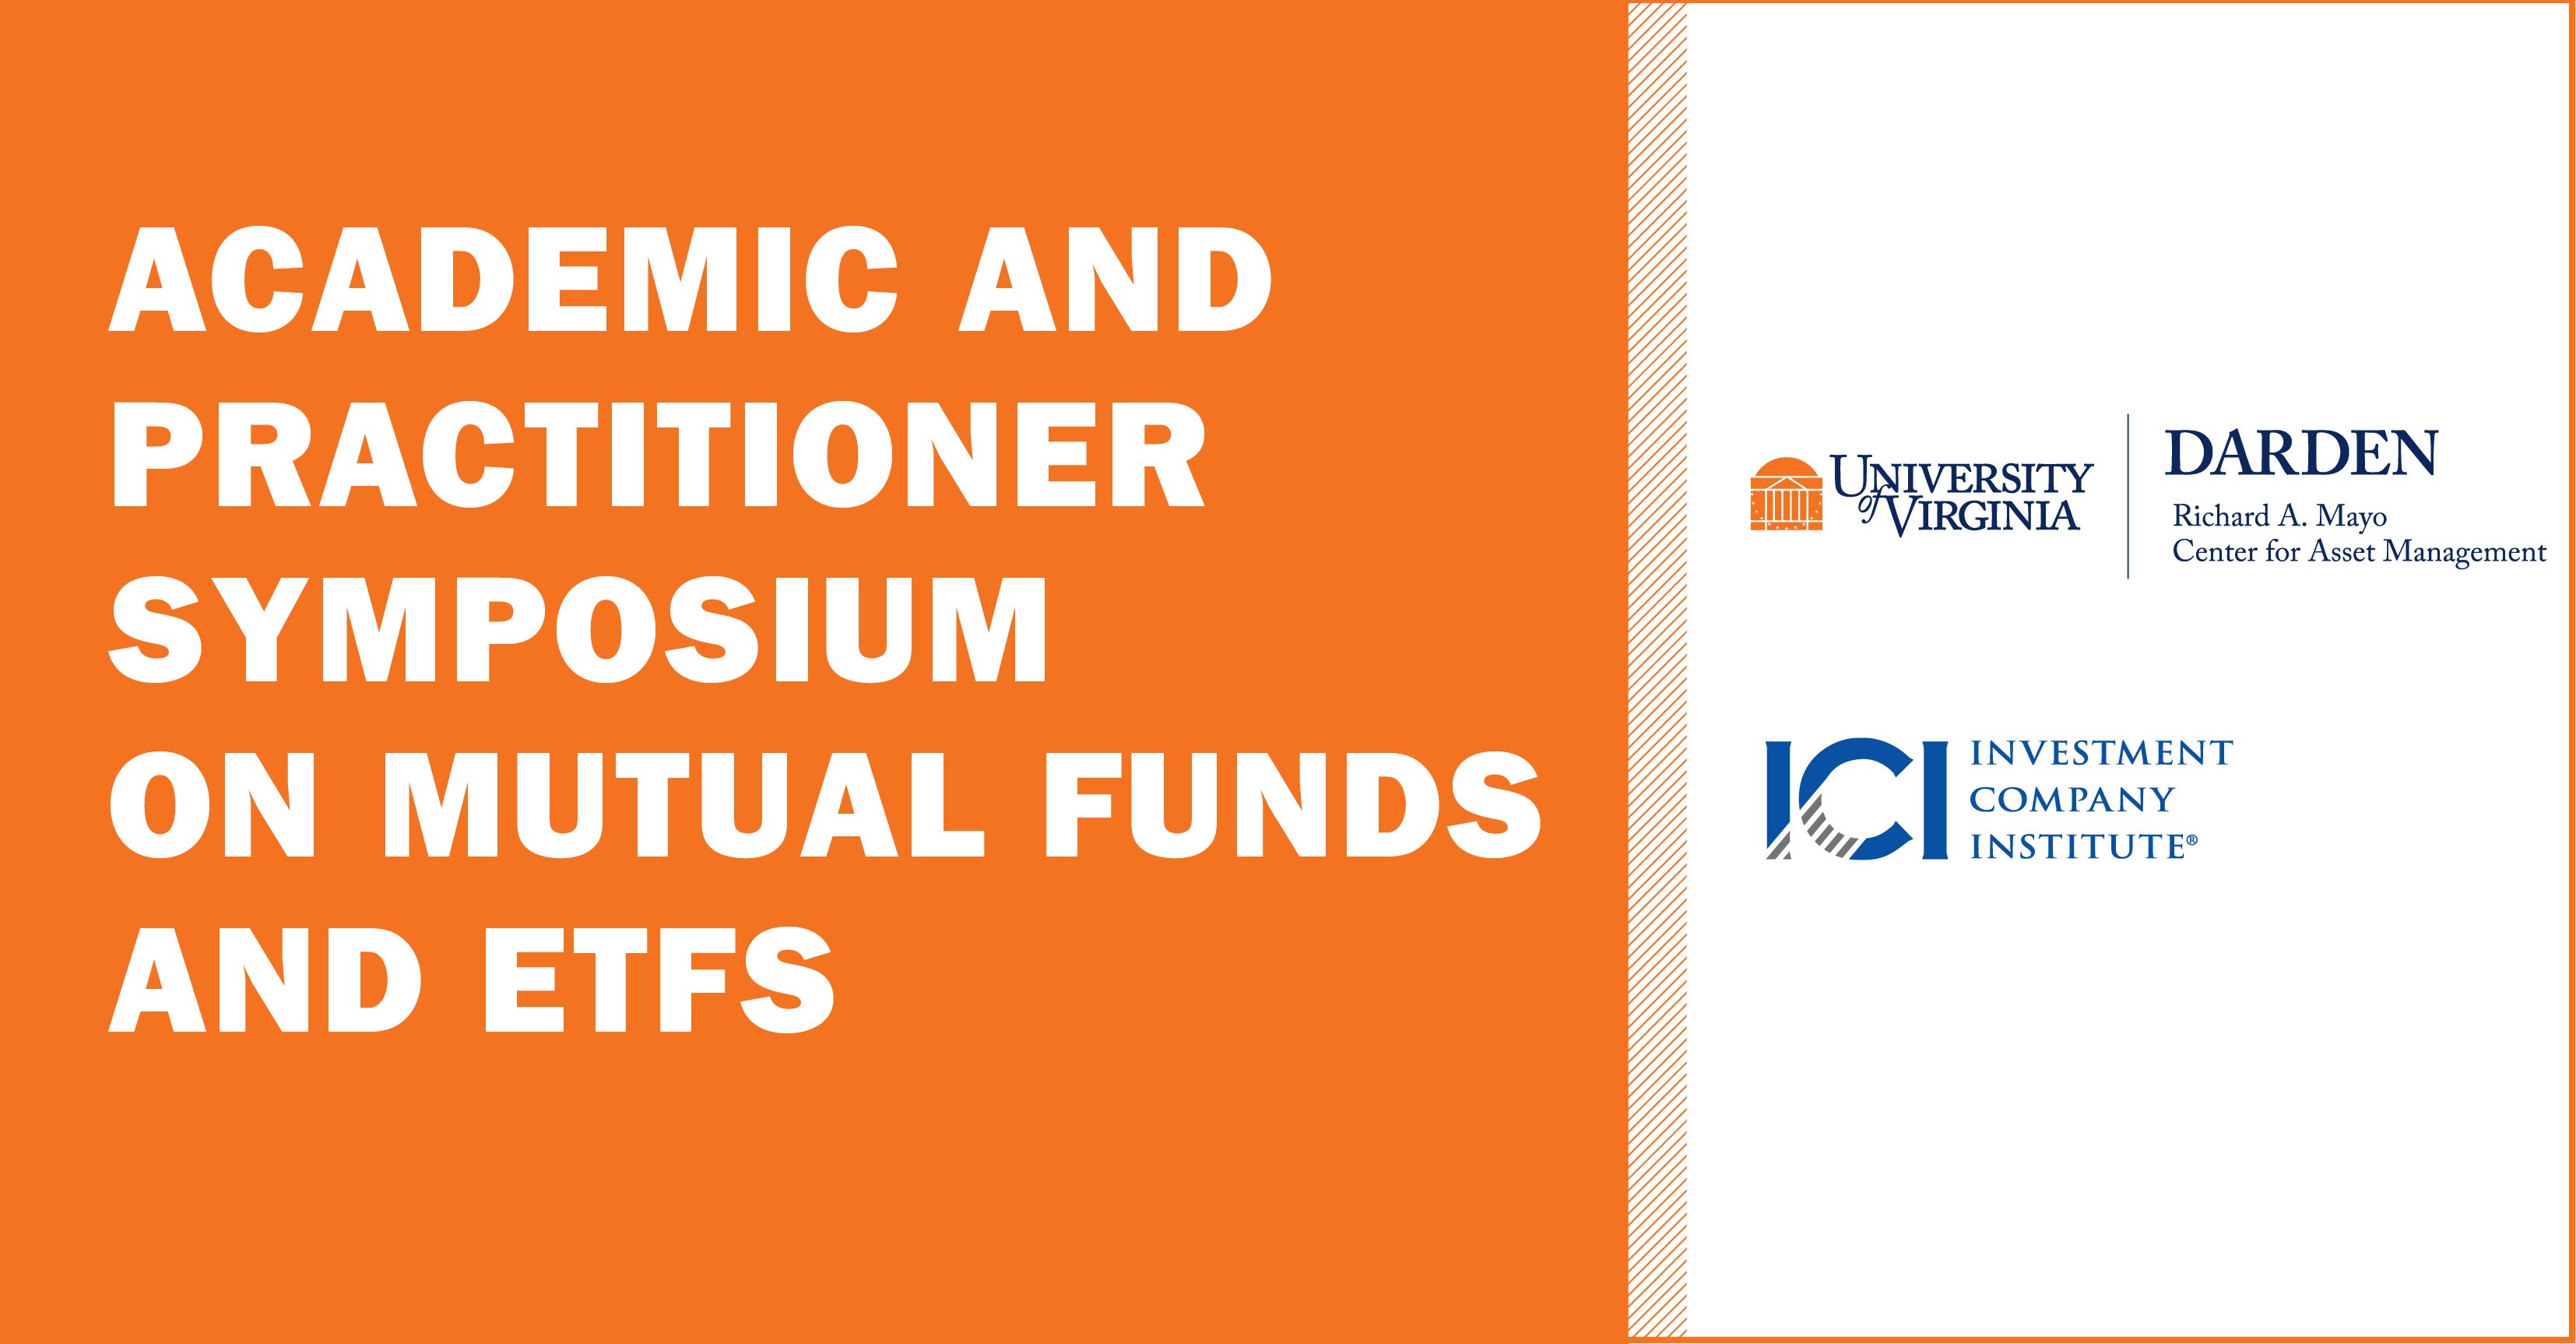 Academic and Practitioner Symposium on Mutual Funds and ETFs